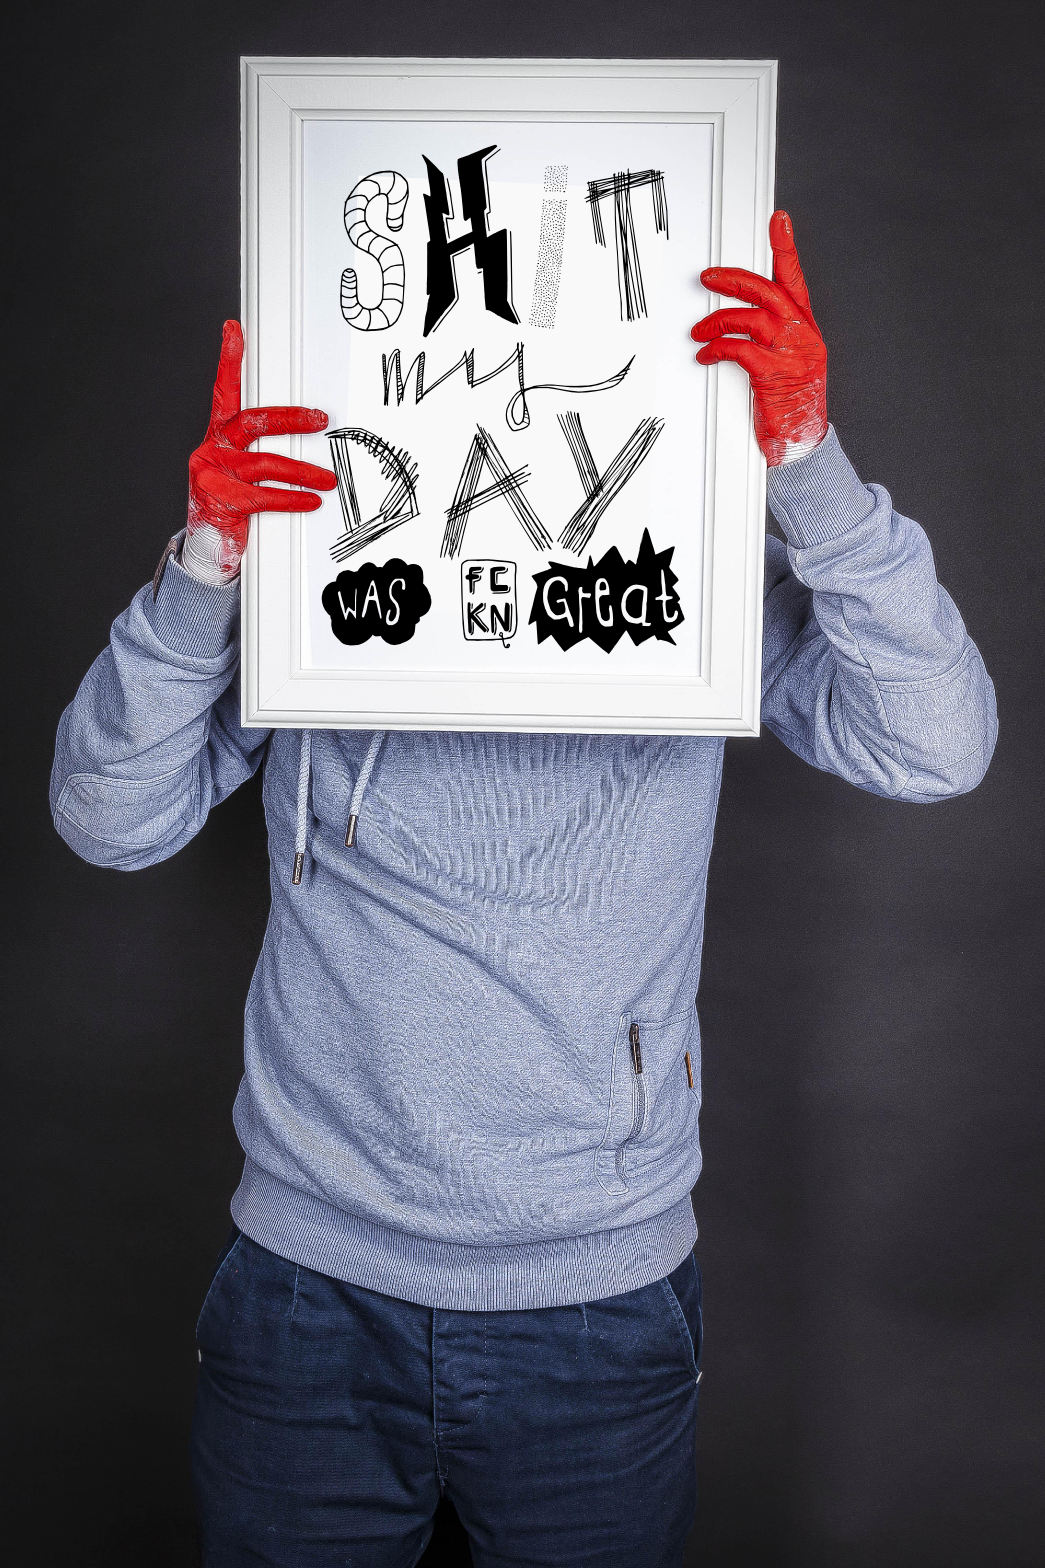 shit my day was fkn grat typo poster web